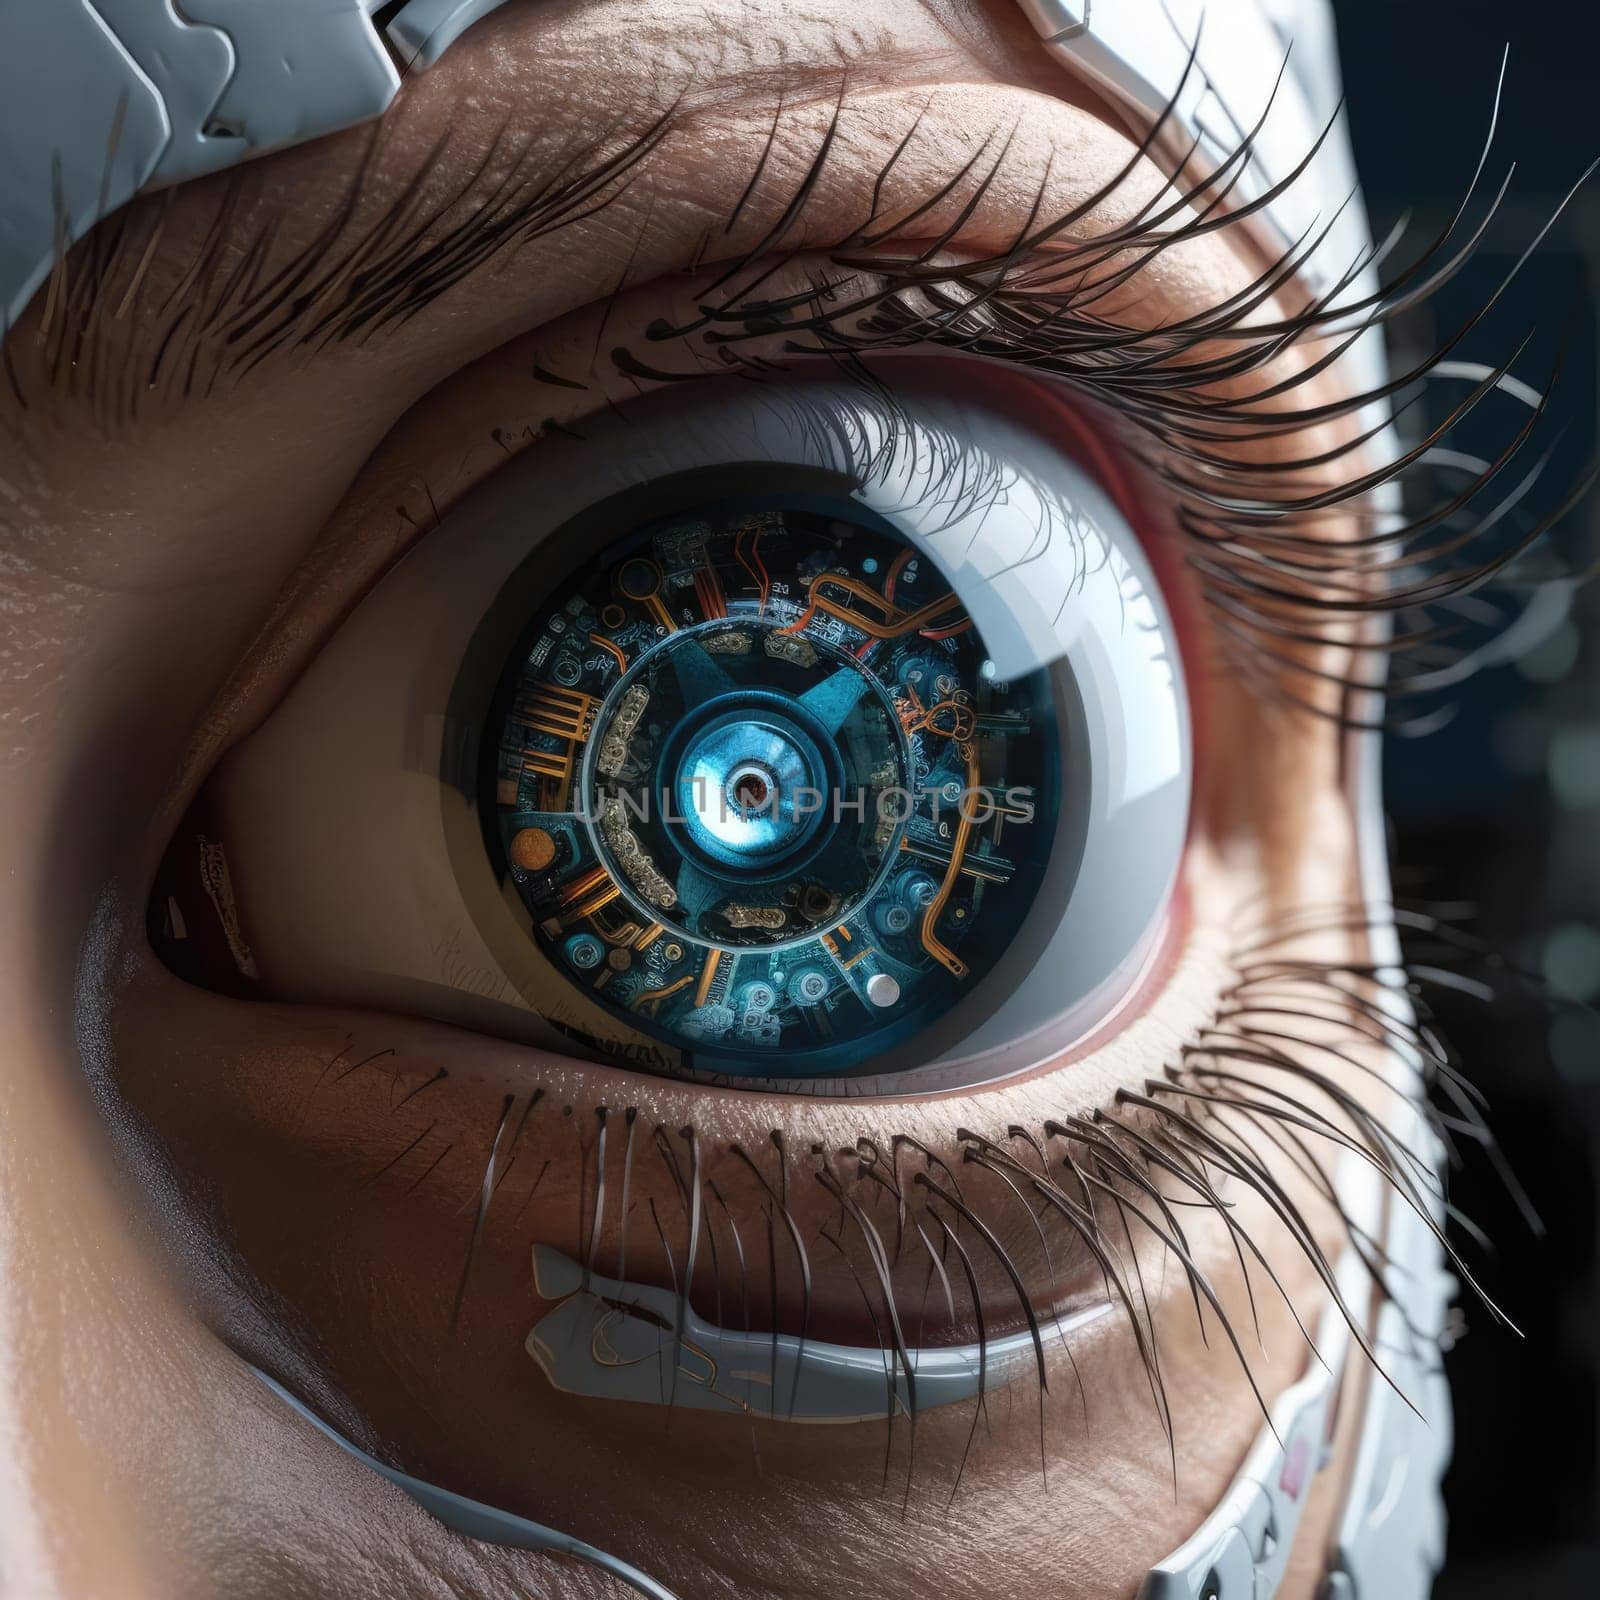 Robotic eye in humans. Machine Vision Concept